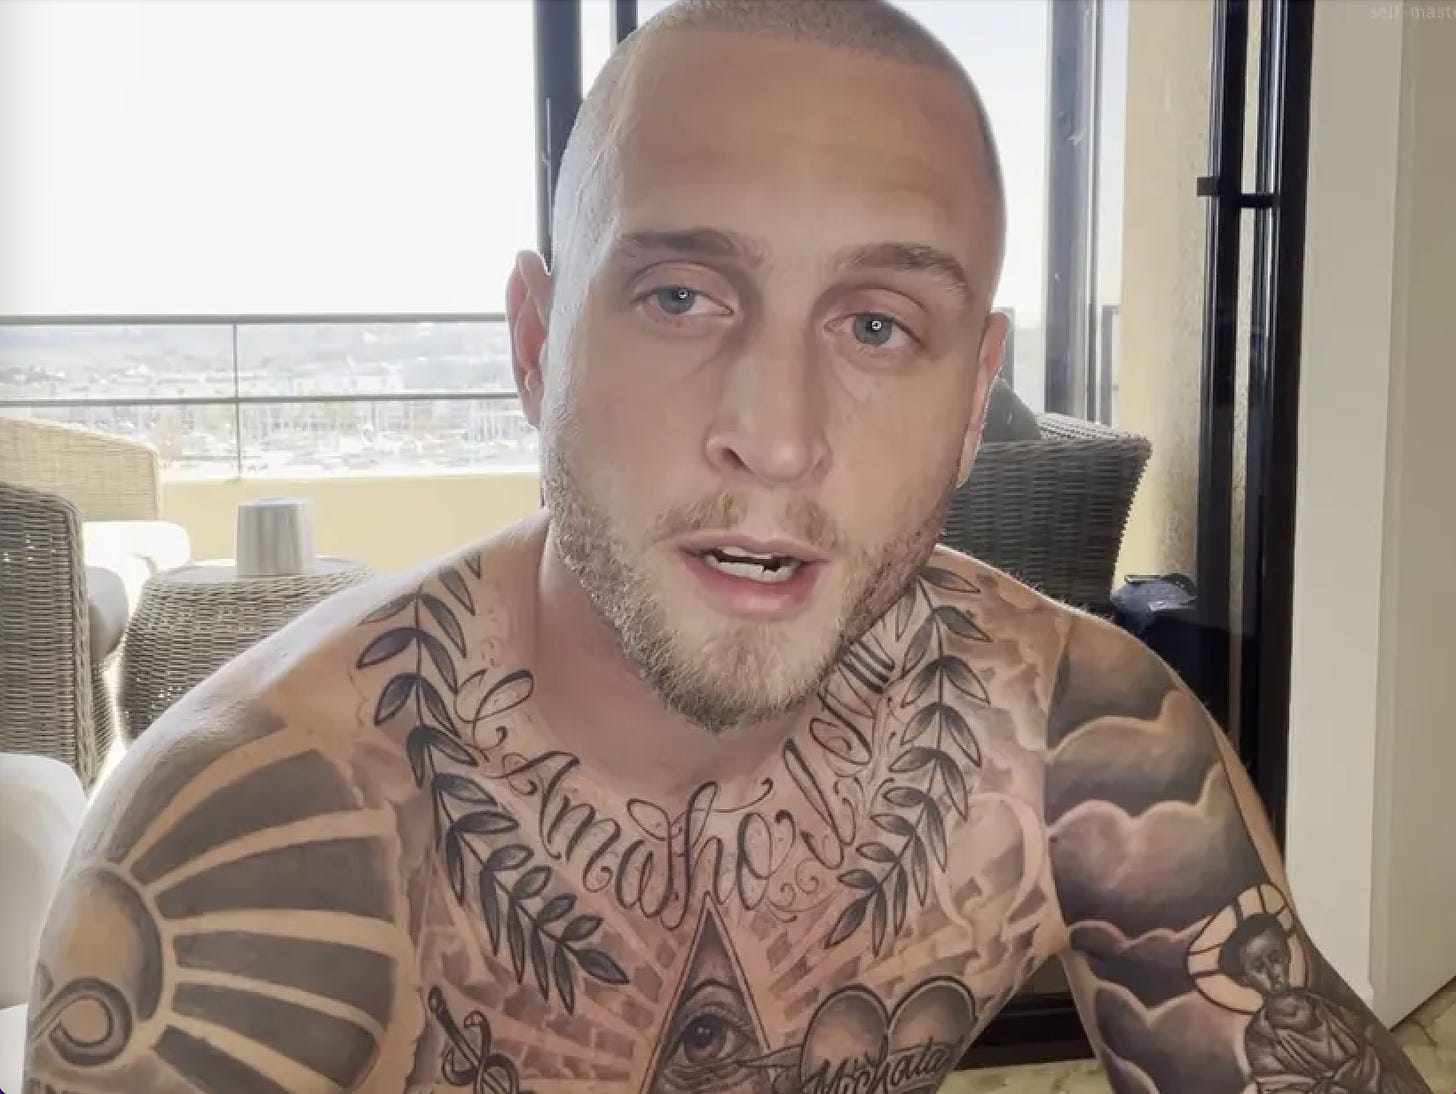 Chet Hanks Just Unveiled a Huge New Chest Tattoo of a Cross